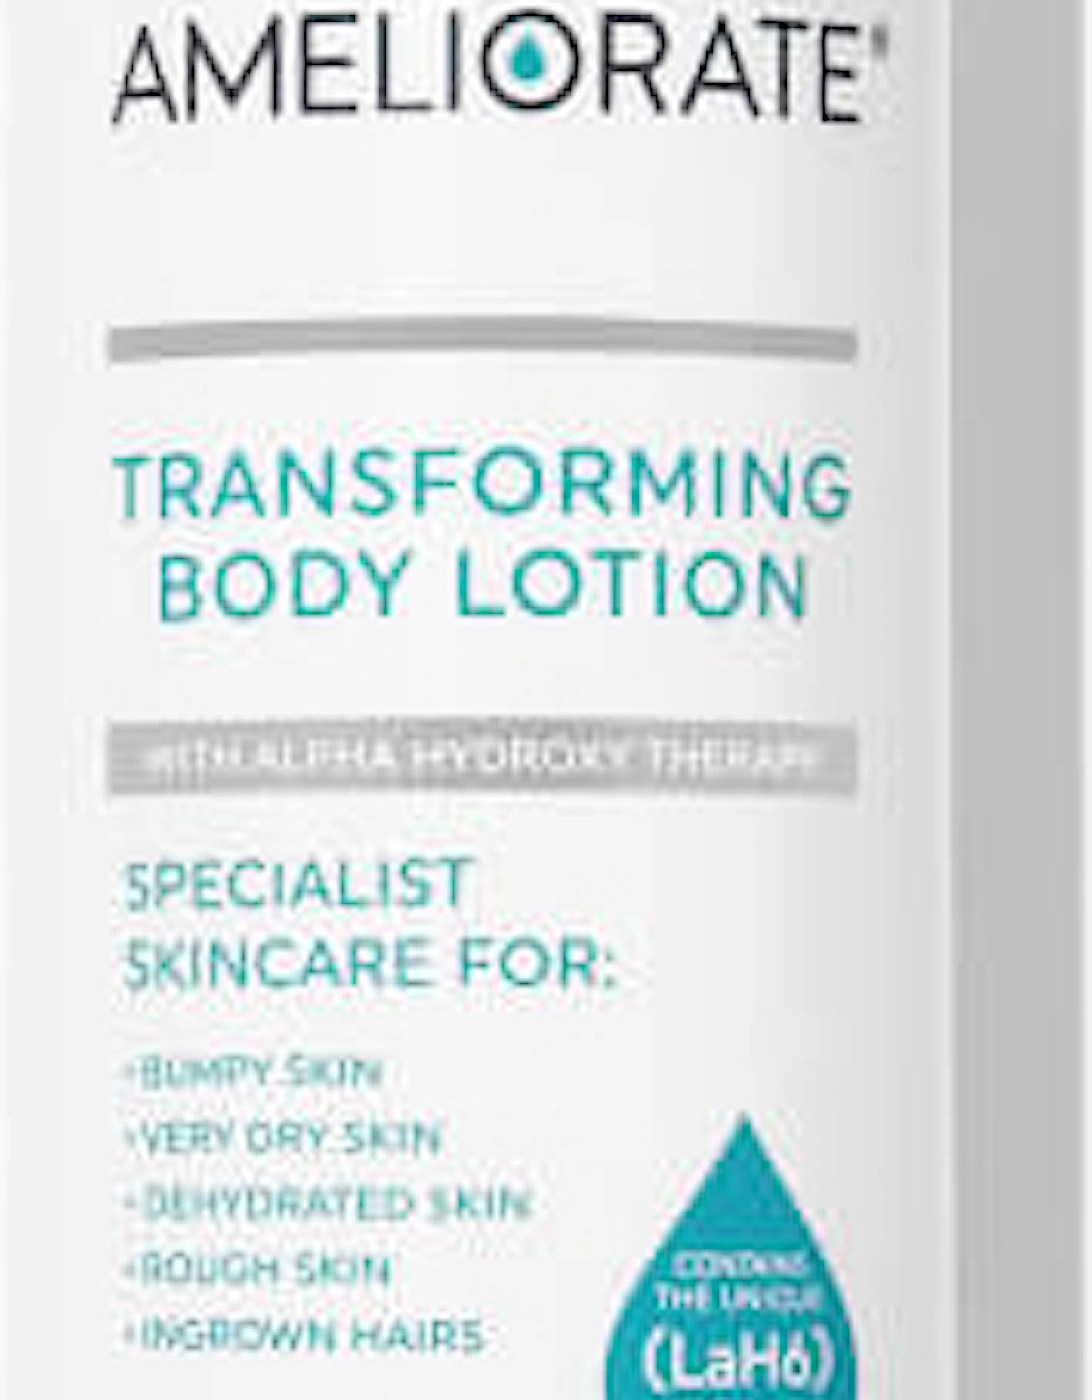 Transforming Body Lotion 500ml - AMELIORATE, 2 of 1